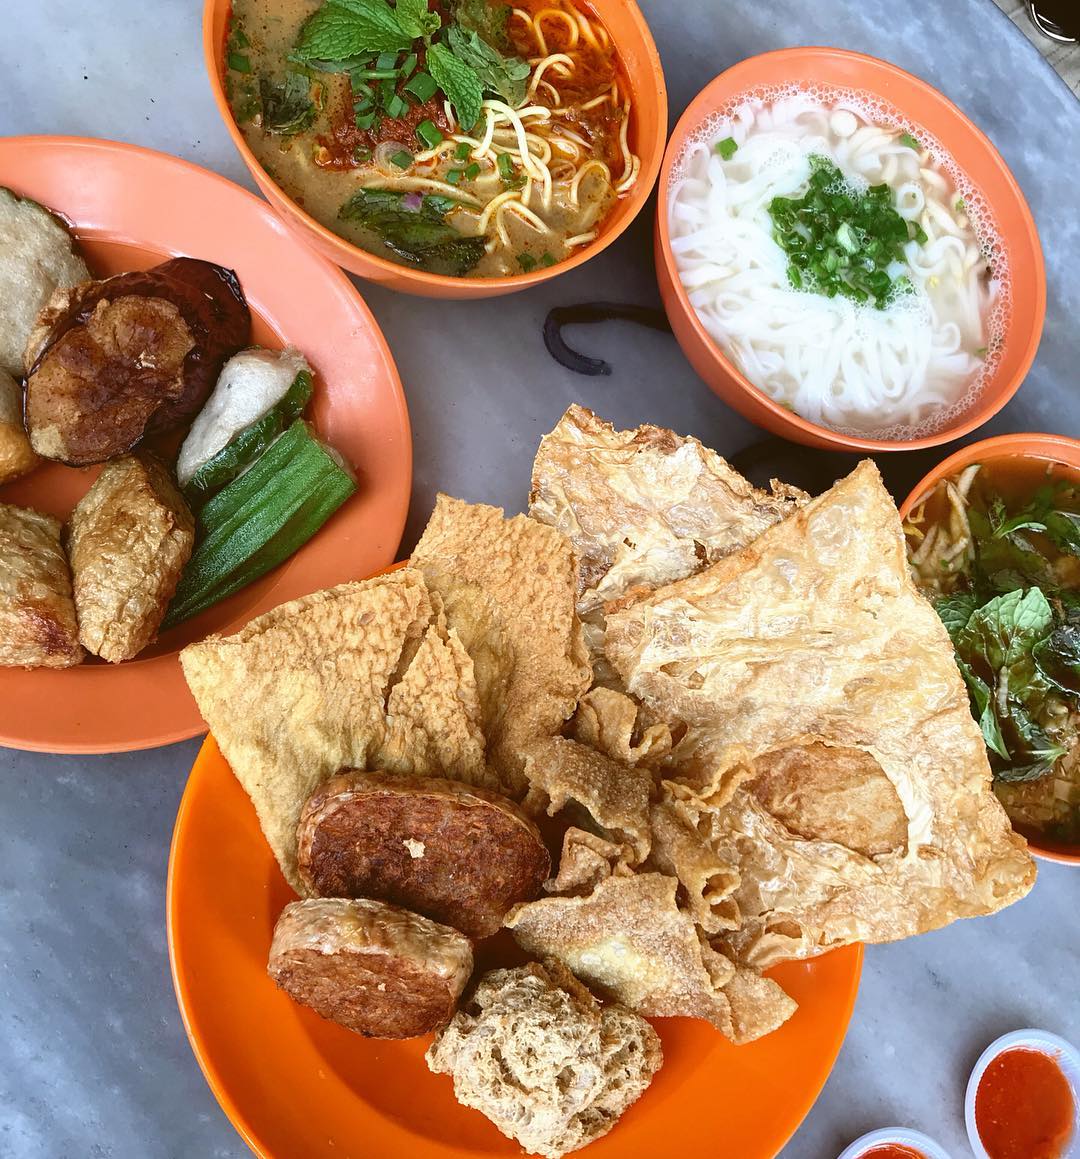 Top 10 Places To Check Out For Breakfast In Ipoh - Foodie